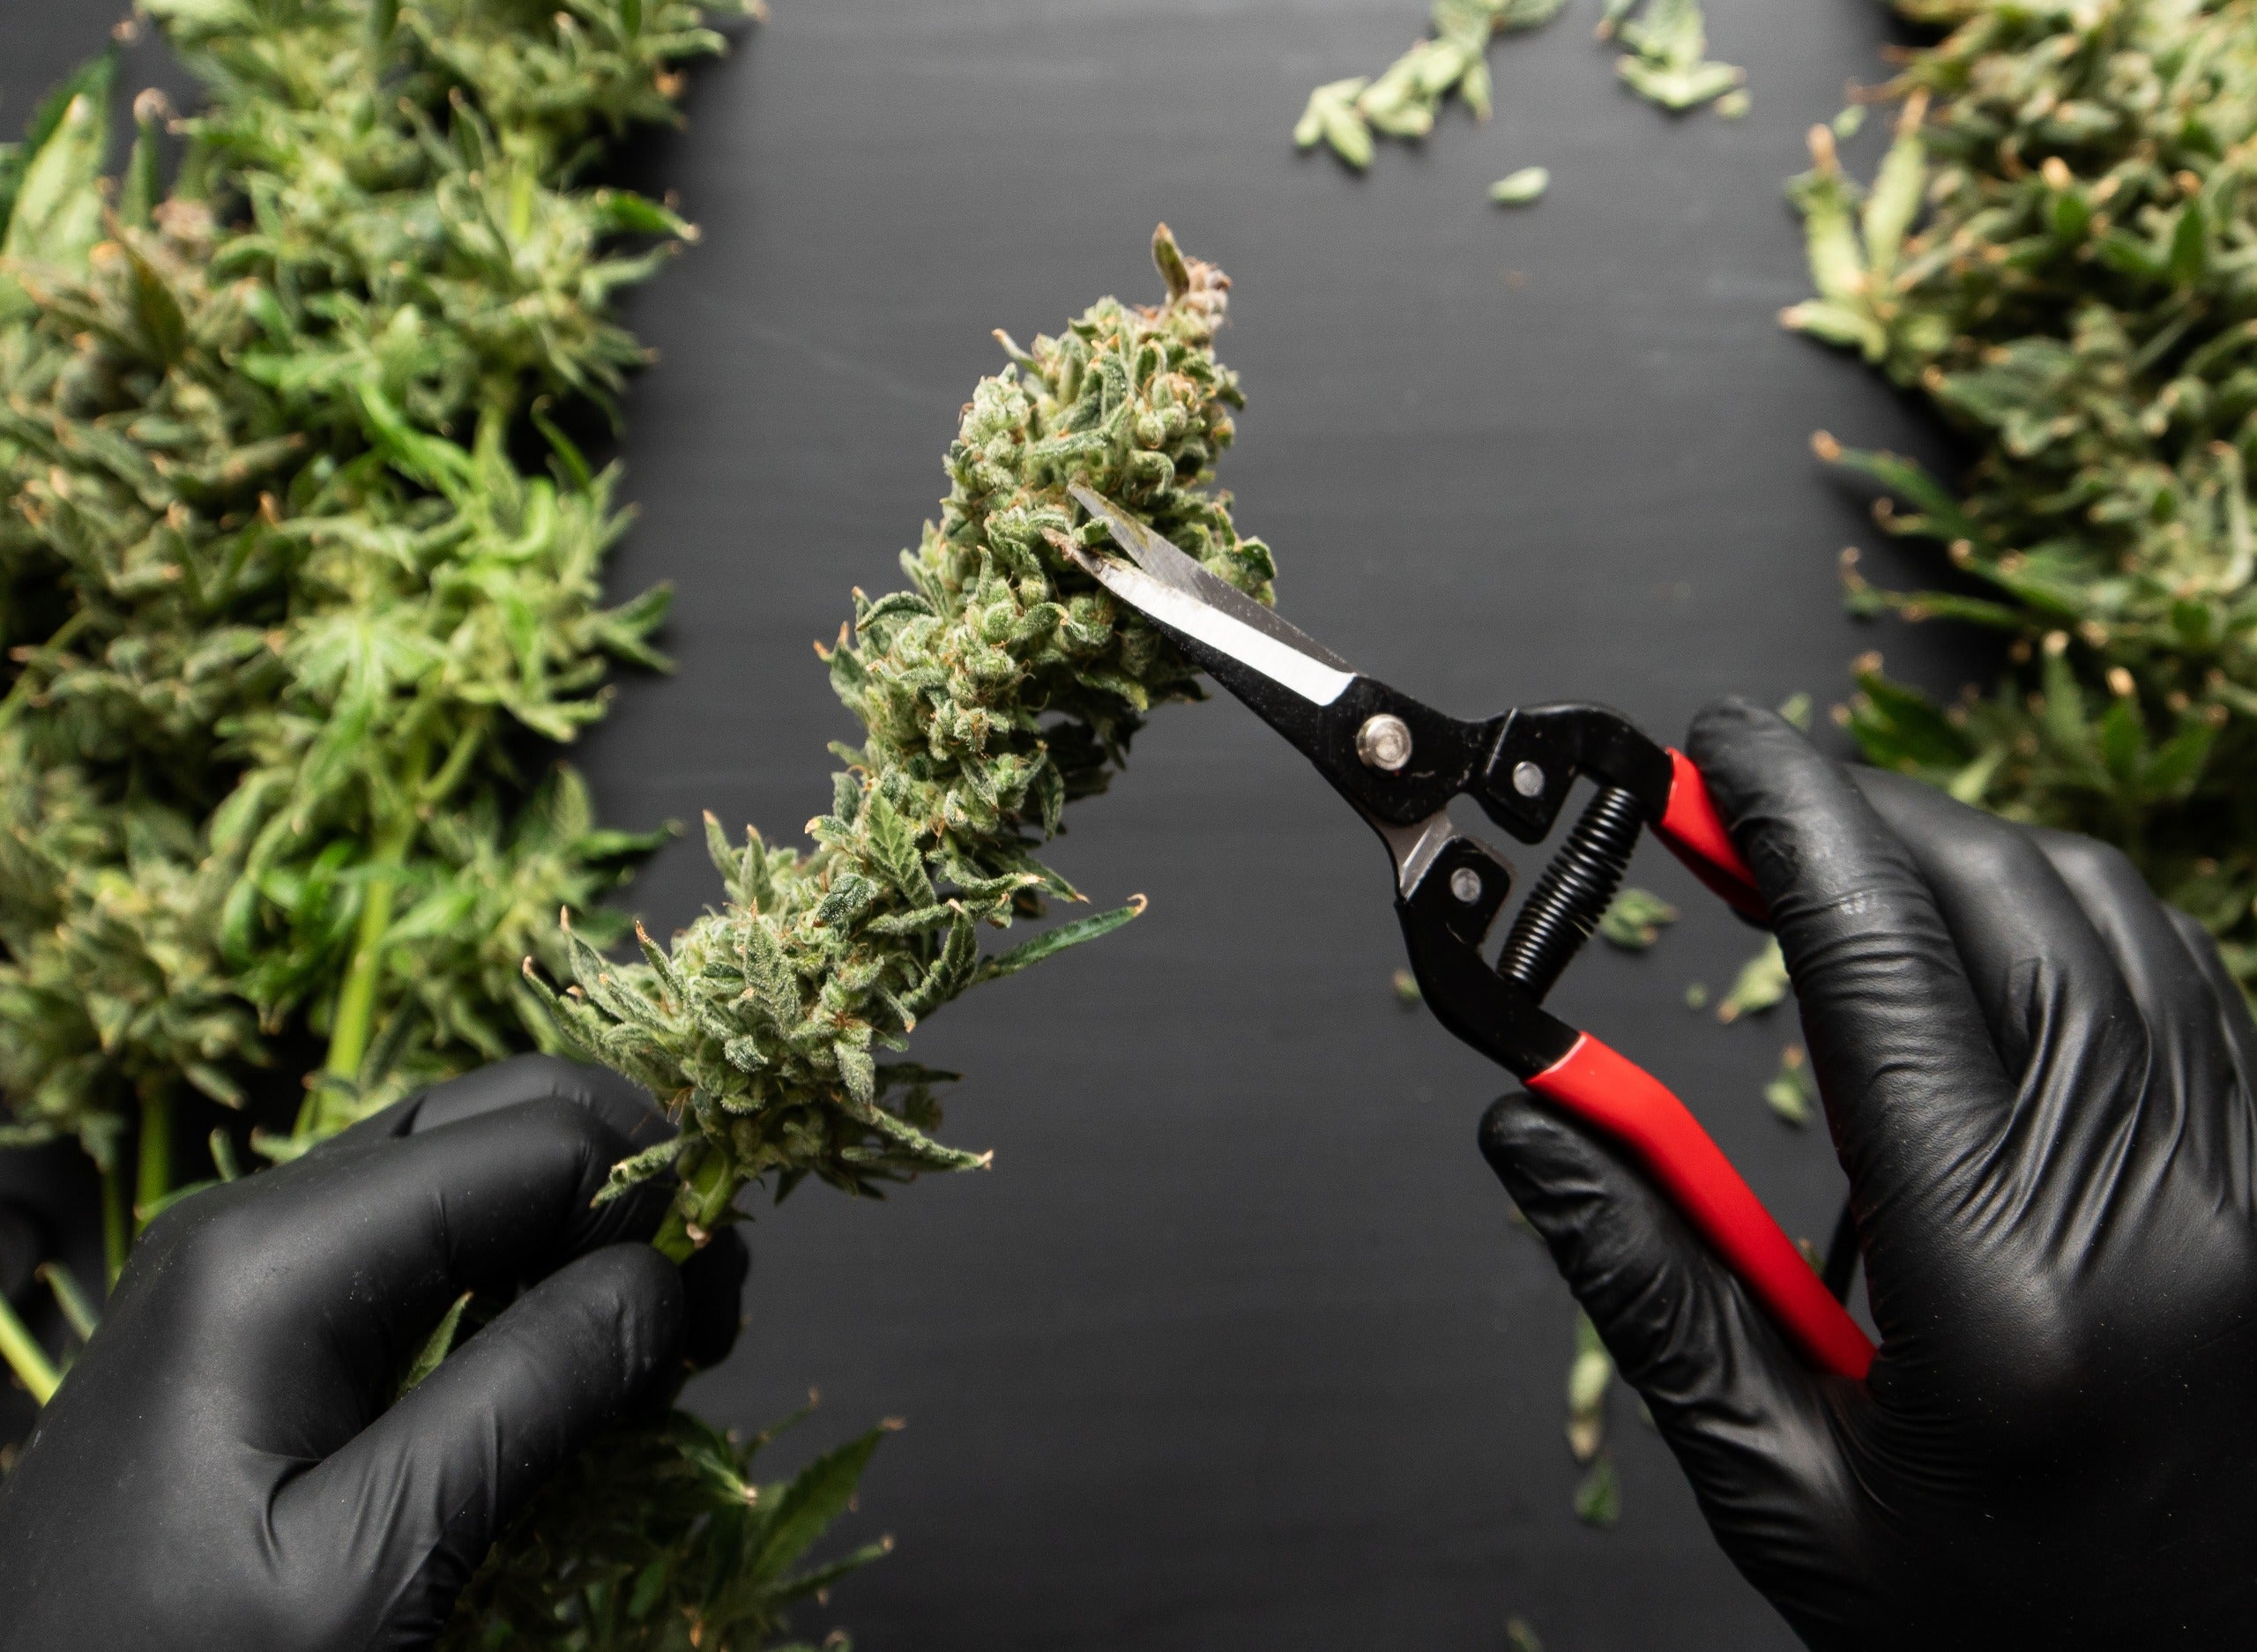 How to Trim Cannabis: A Complete Guide